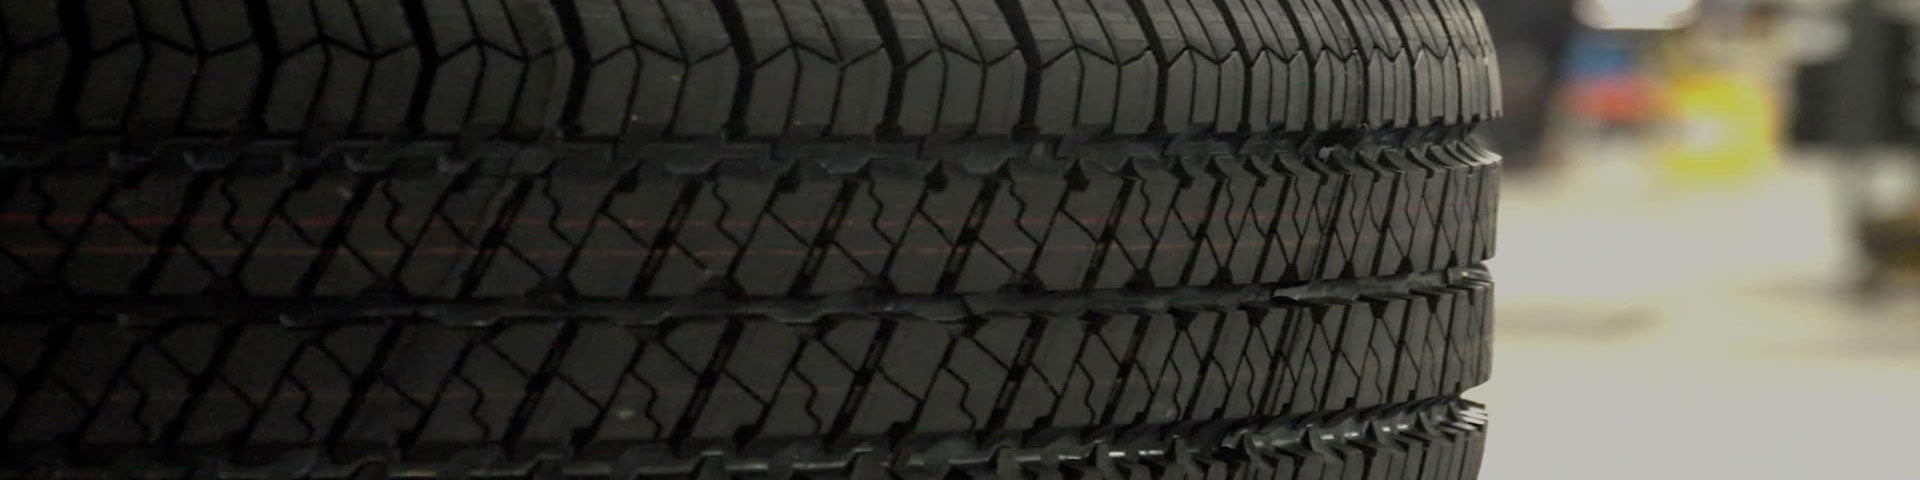 close up view of a tire laid on its side